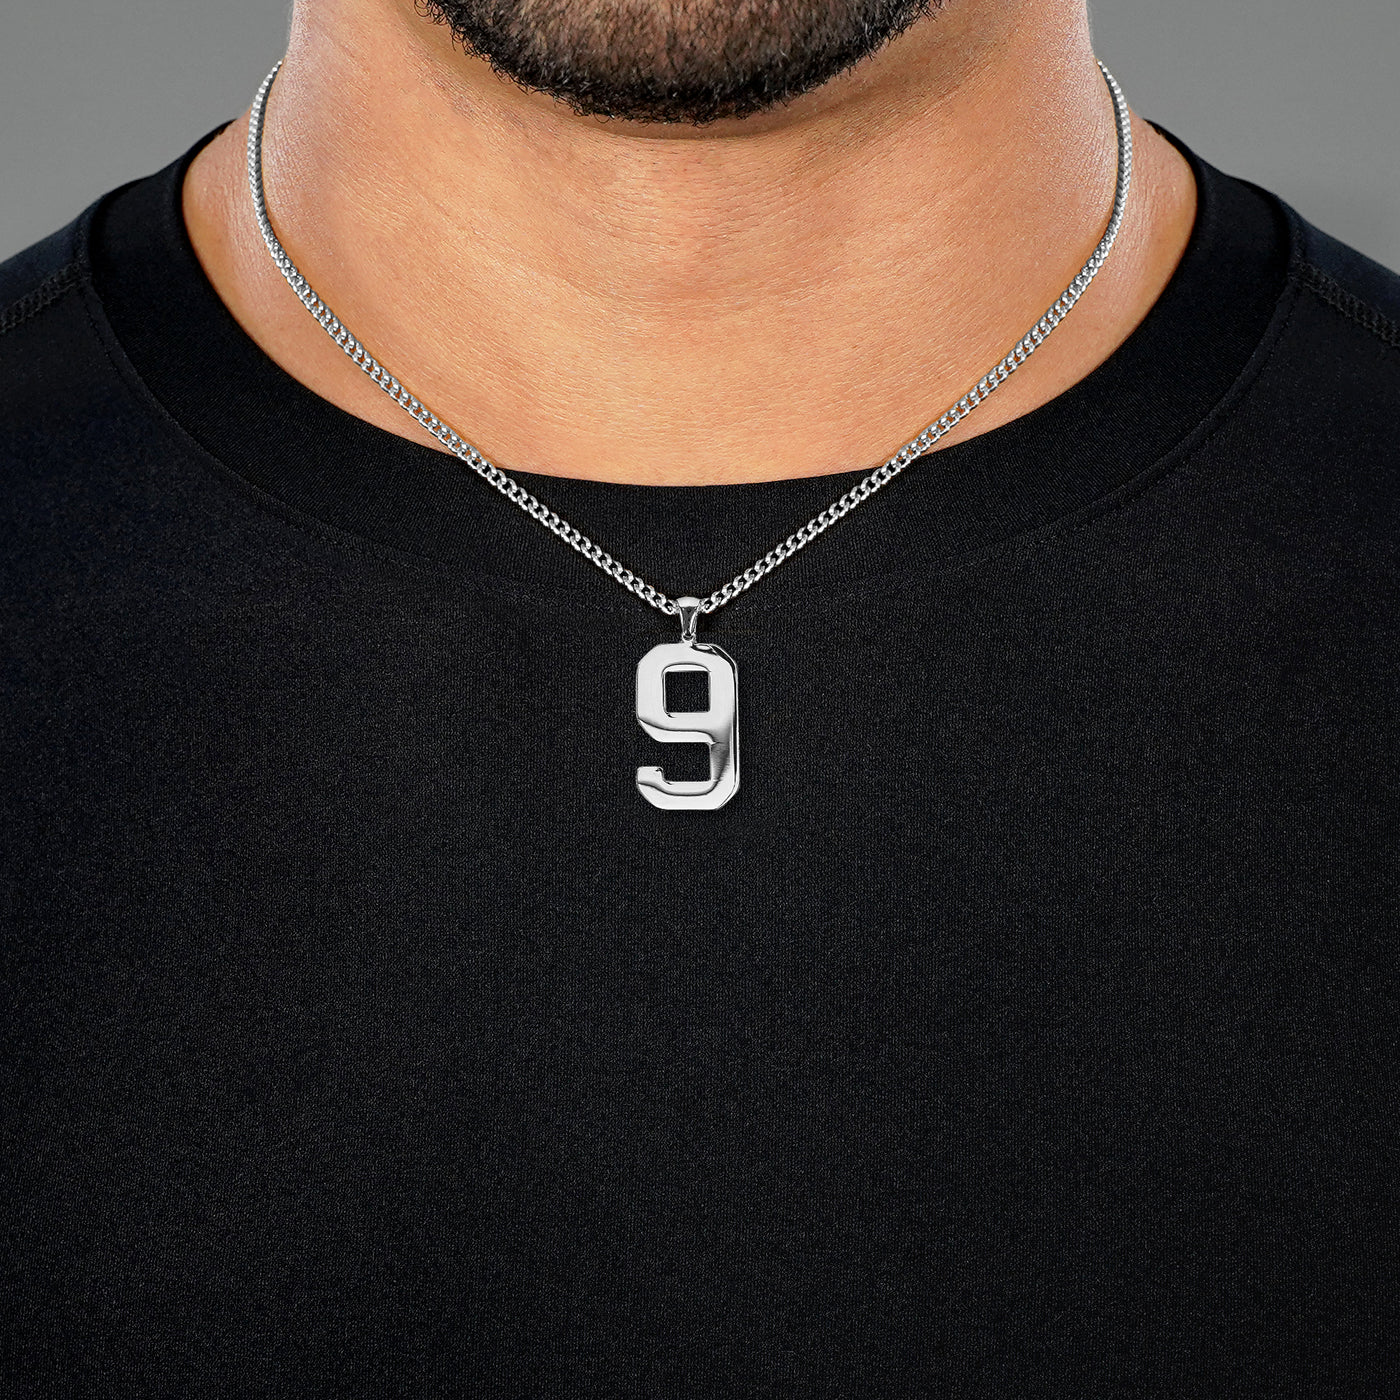 9 Number Pendant with Chain Necklace - Stainless Steel